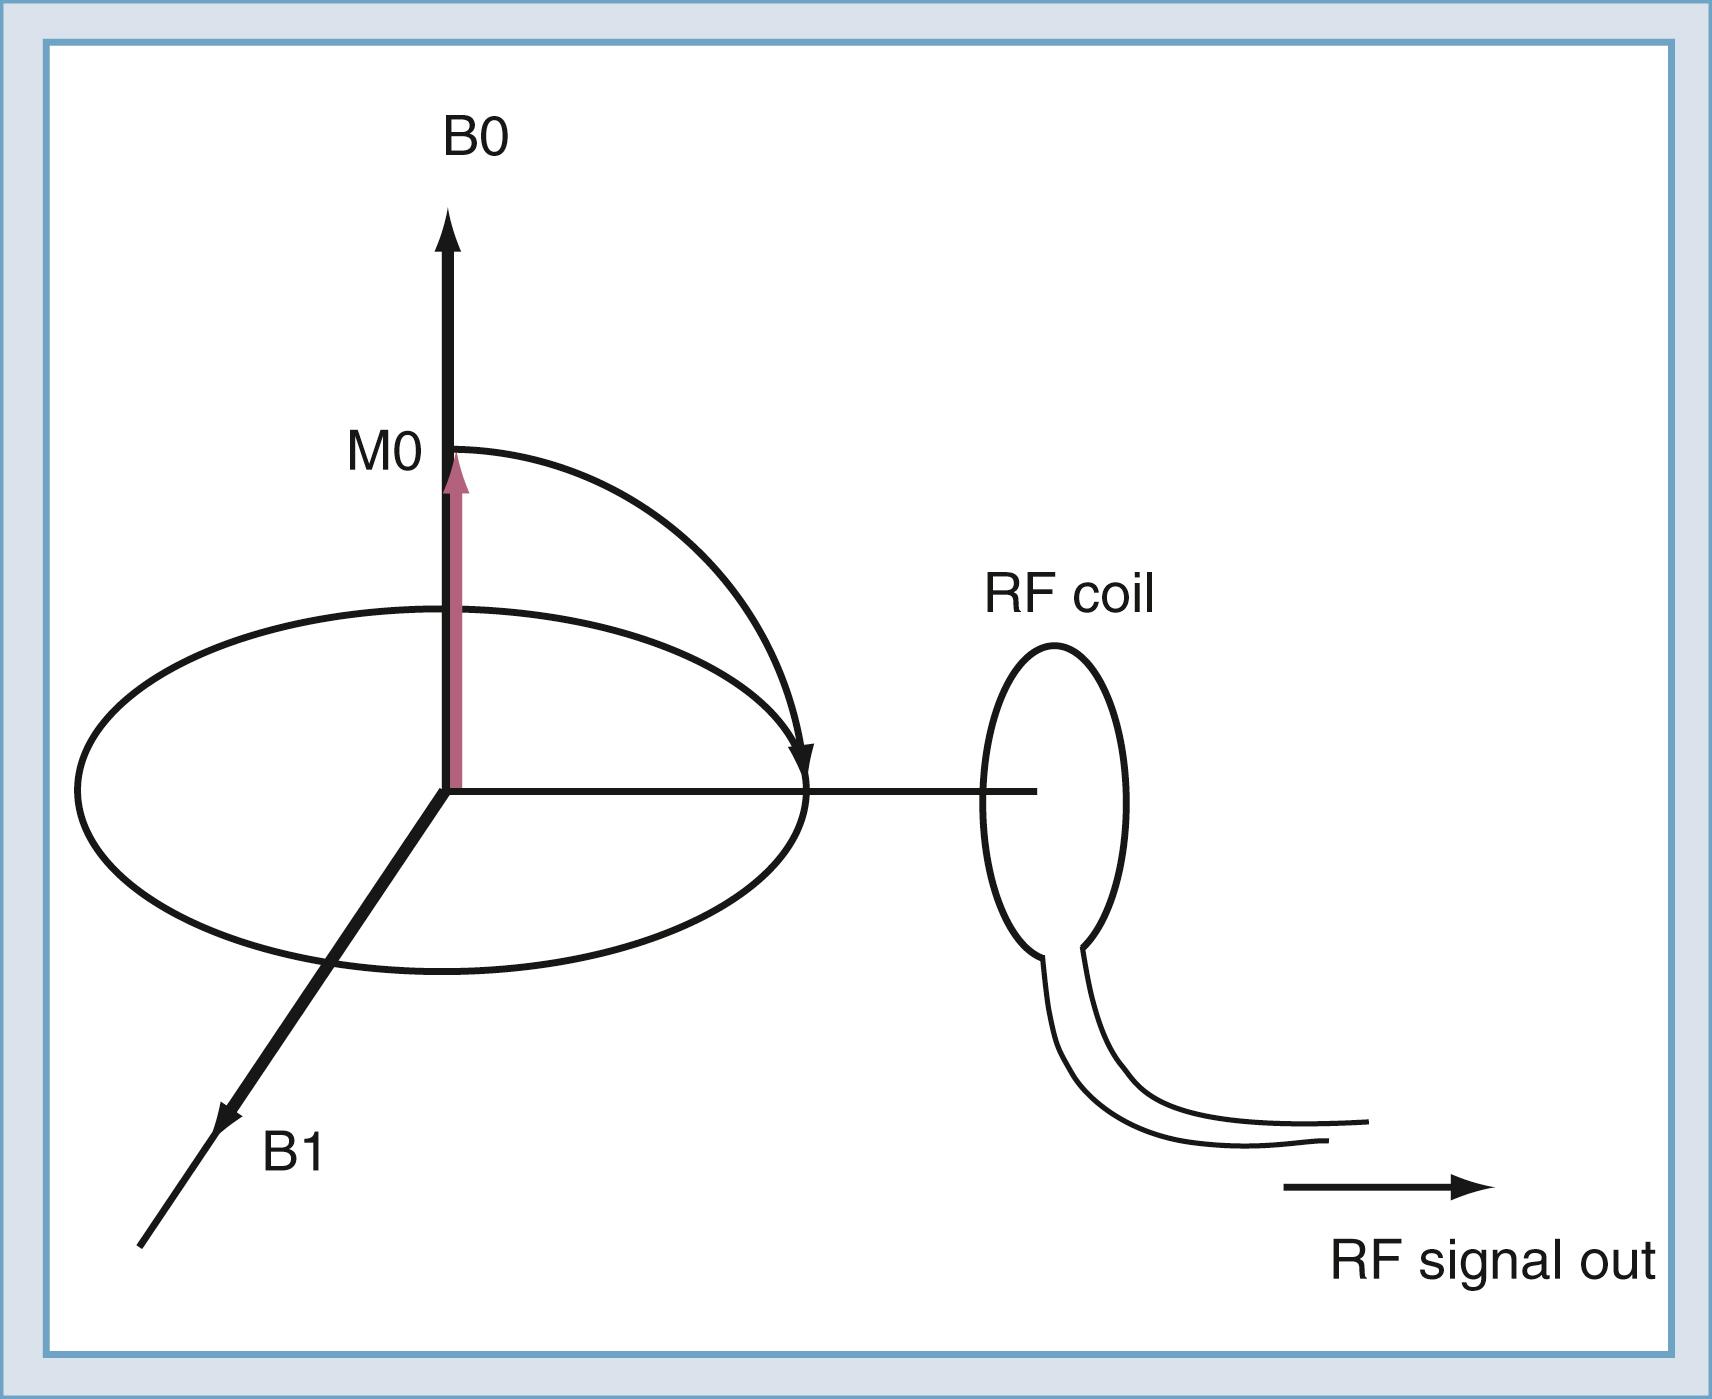 Figure 10.12, The radiofrequency (RF) coil both transmits and receives the signal from the spins in the transverse plane, where B0 and B1 are magnetic fields and M0 is the magnetization.